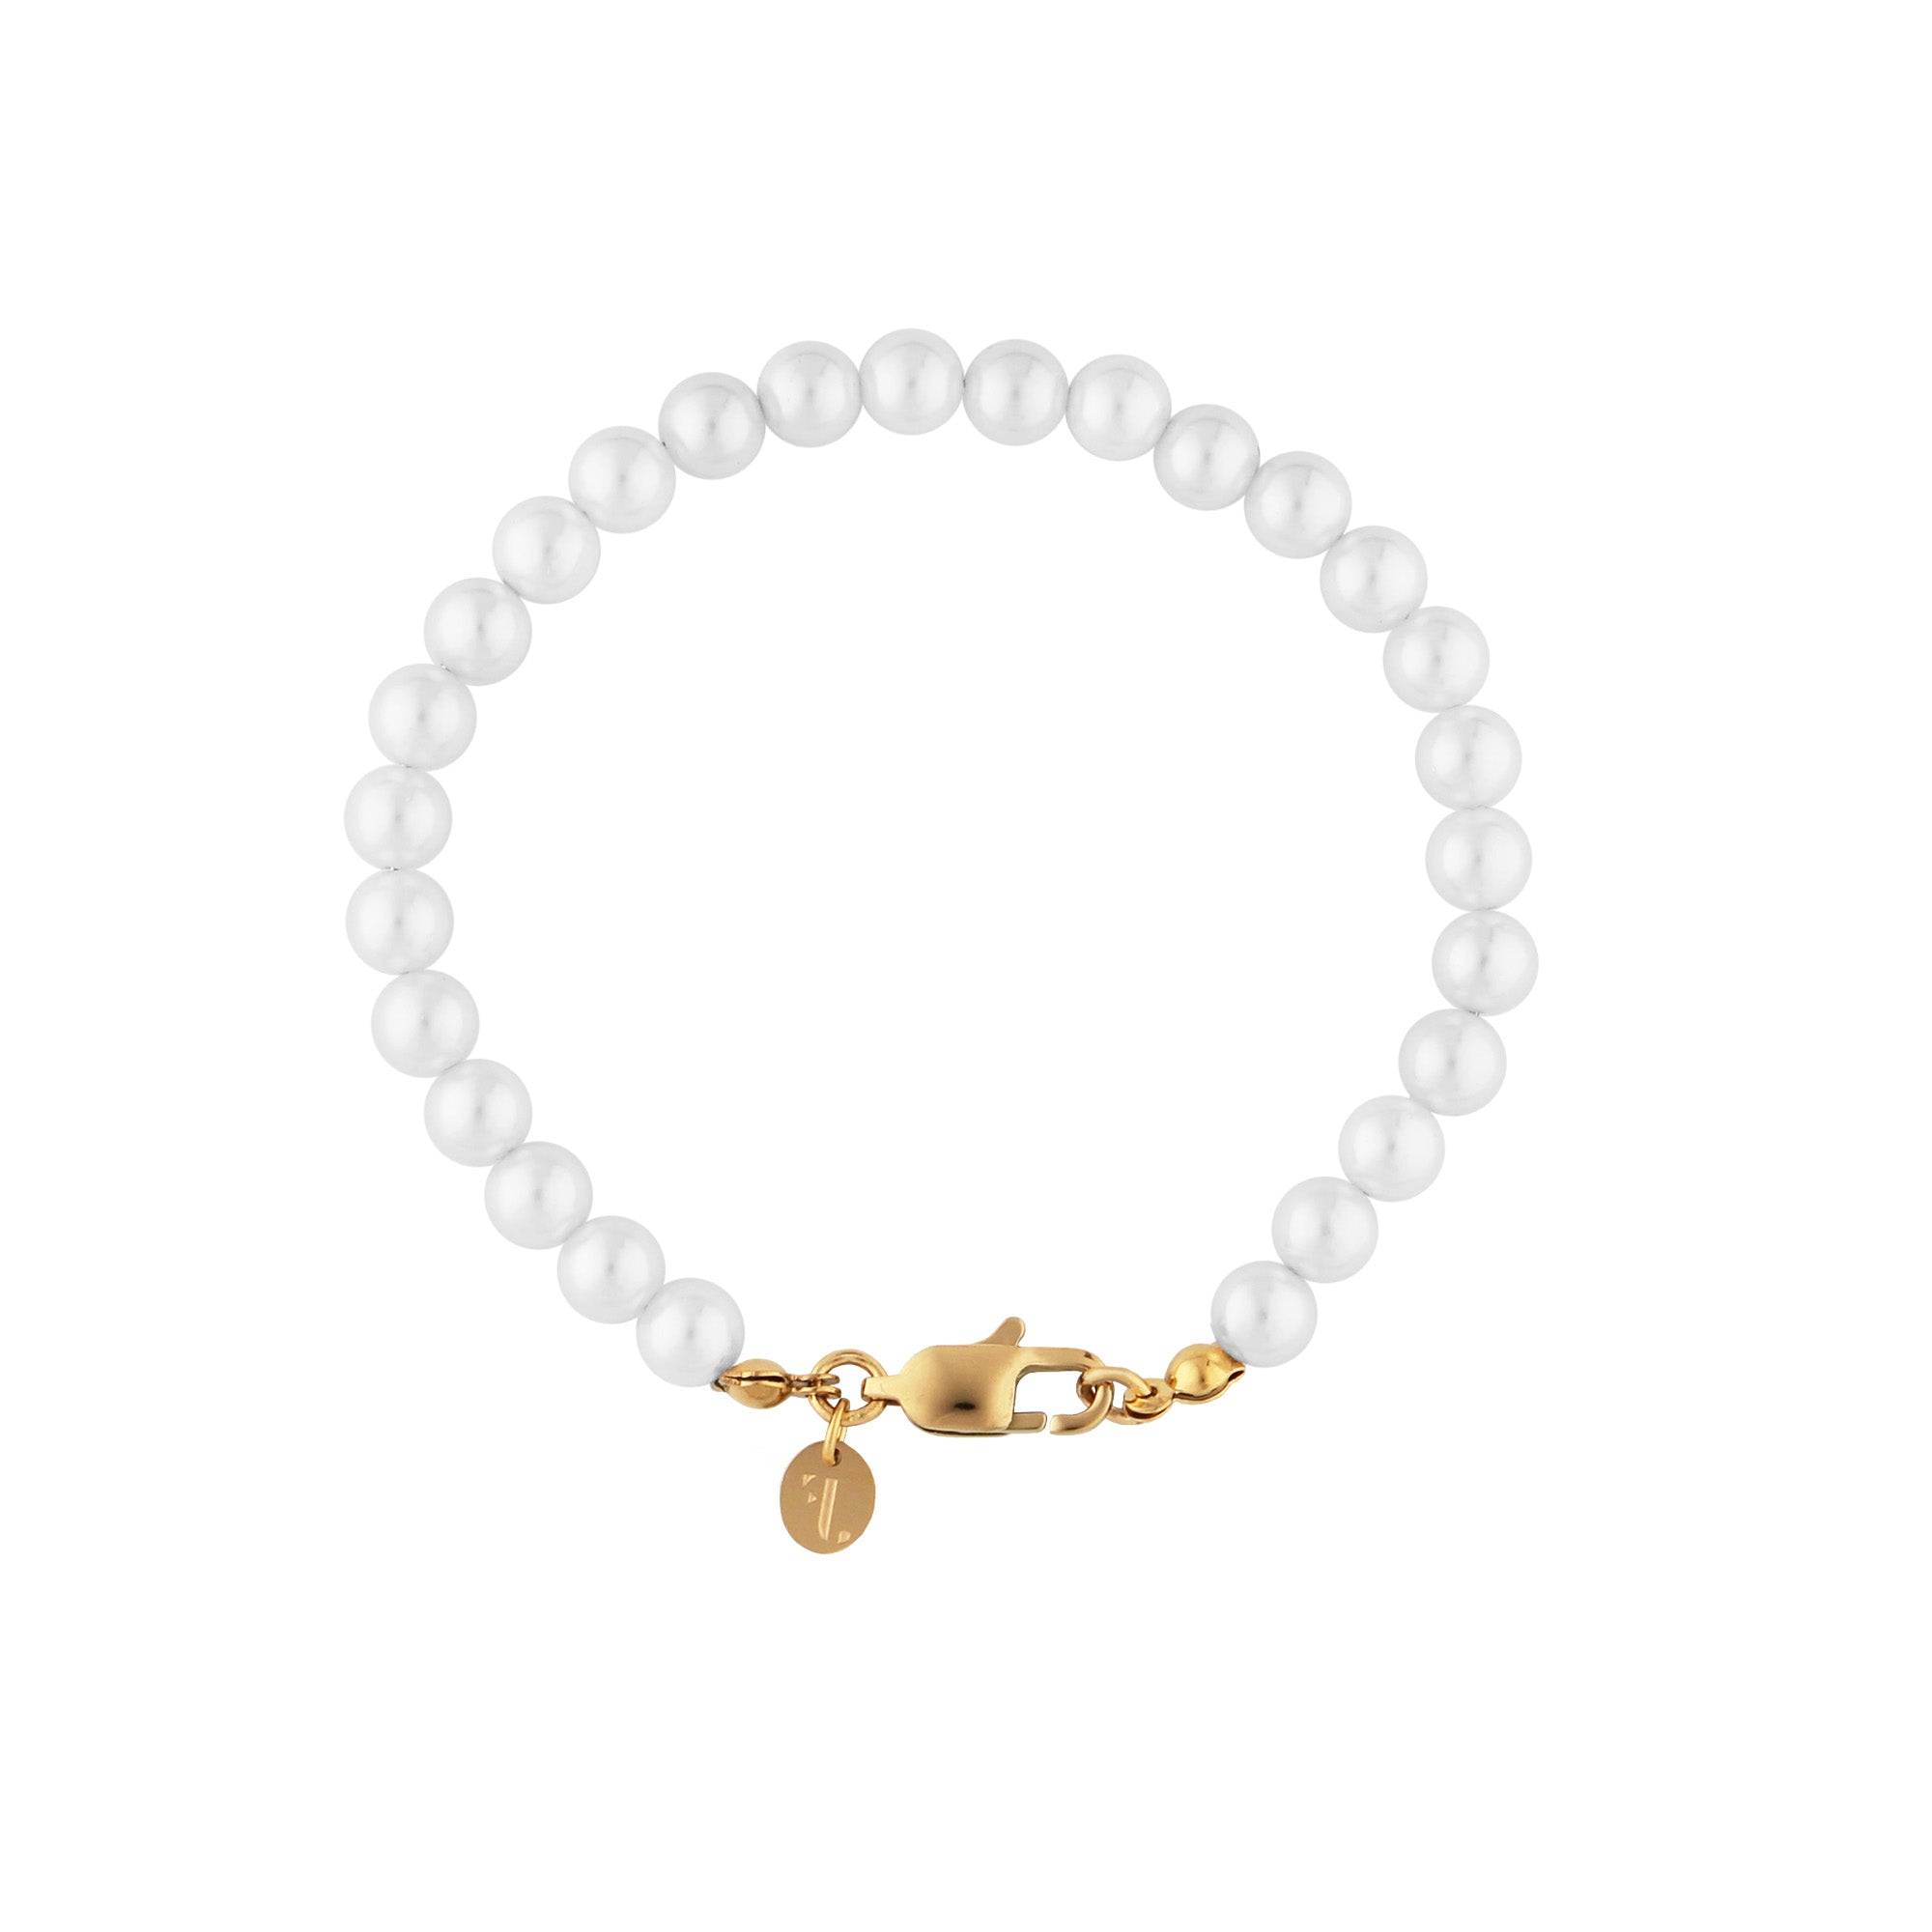 Var men's bracelet by Five Jwlry, designed with white glass pearls complemented by a gold stainless steel buckle. Available in sizes 20cm and 23cm. Crafted from water-resistant 316L stainless steel. Hypoallergenic with a 2-year warranty.